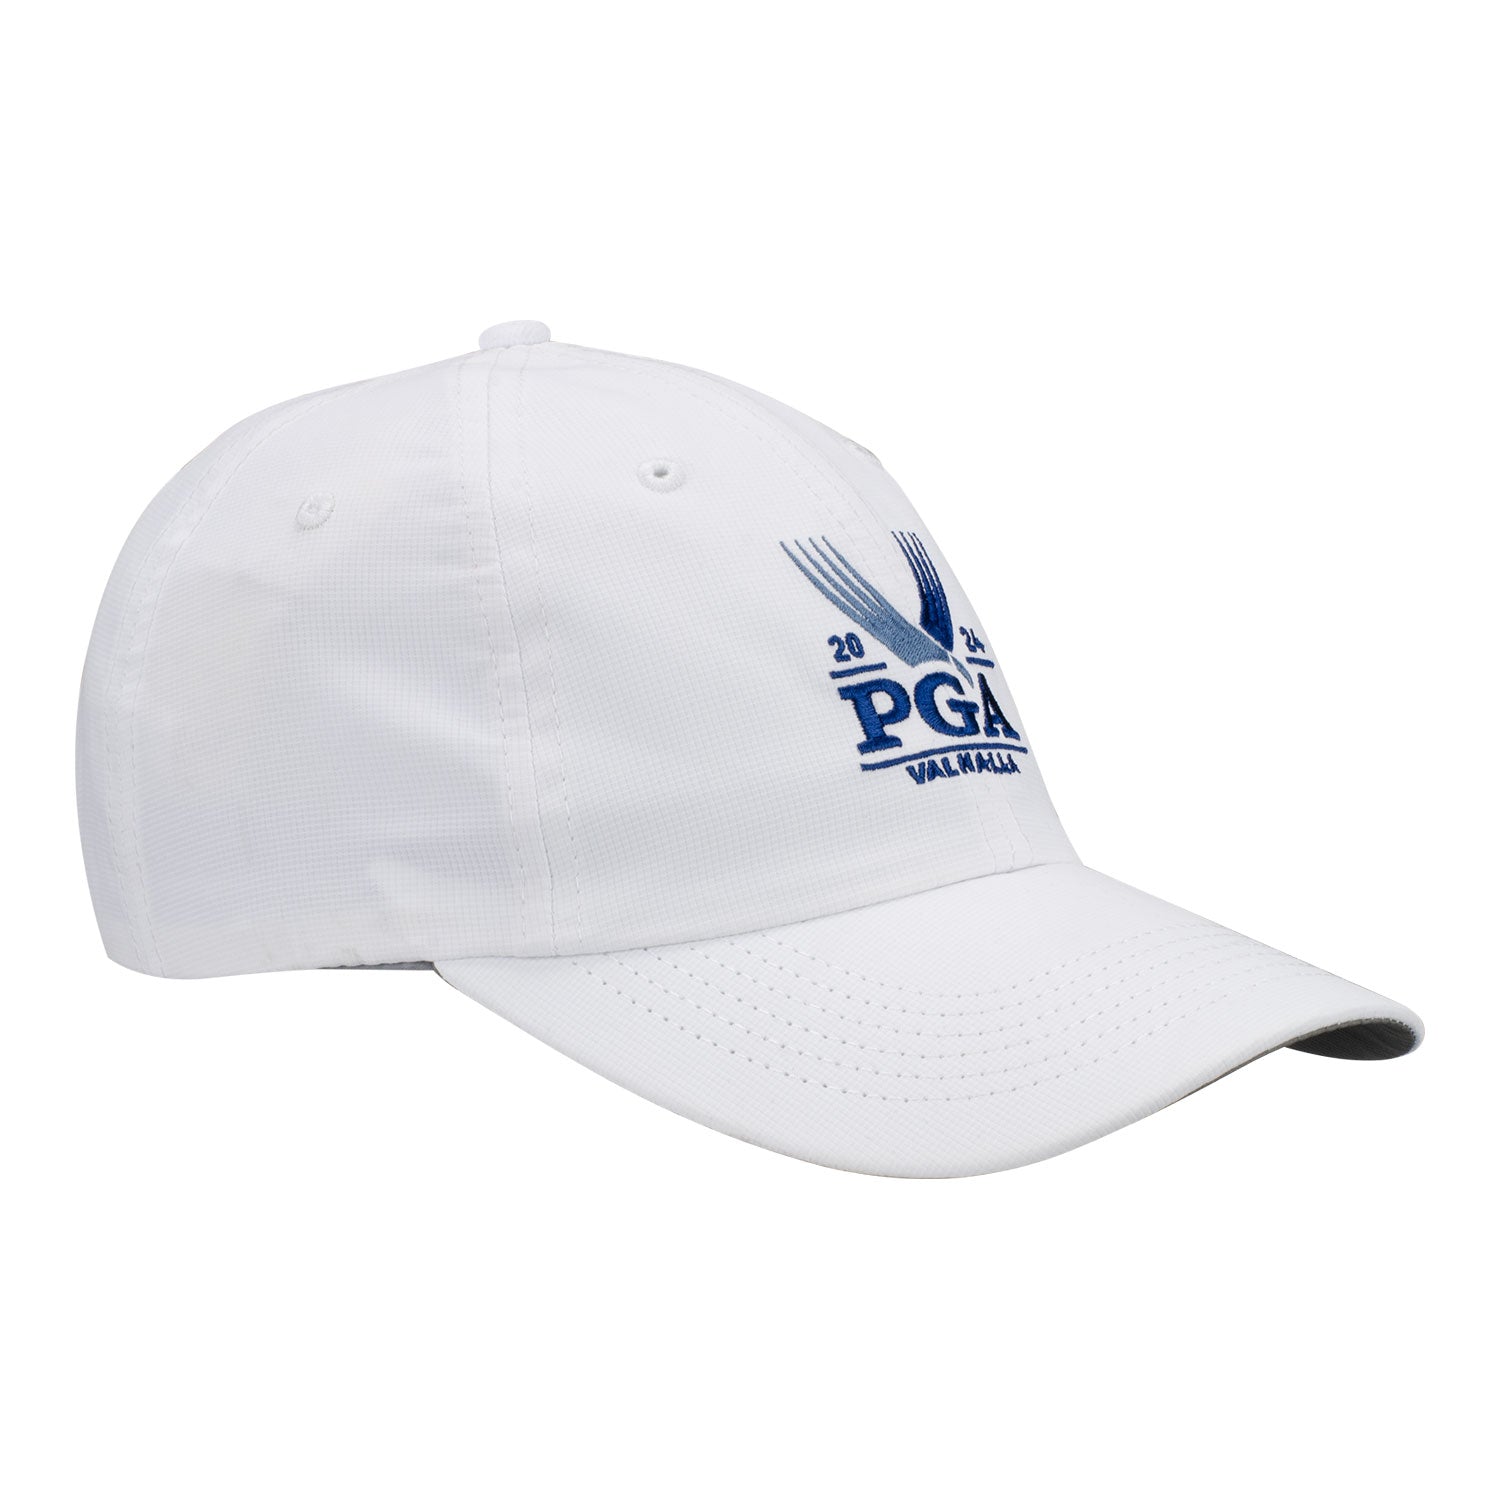 Imperial 2024 PGA Championship X210P The Original Performance Hat in White / Navy - Angled Left Side View